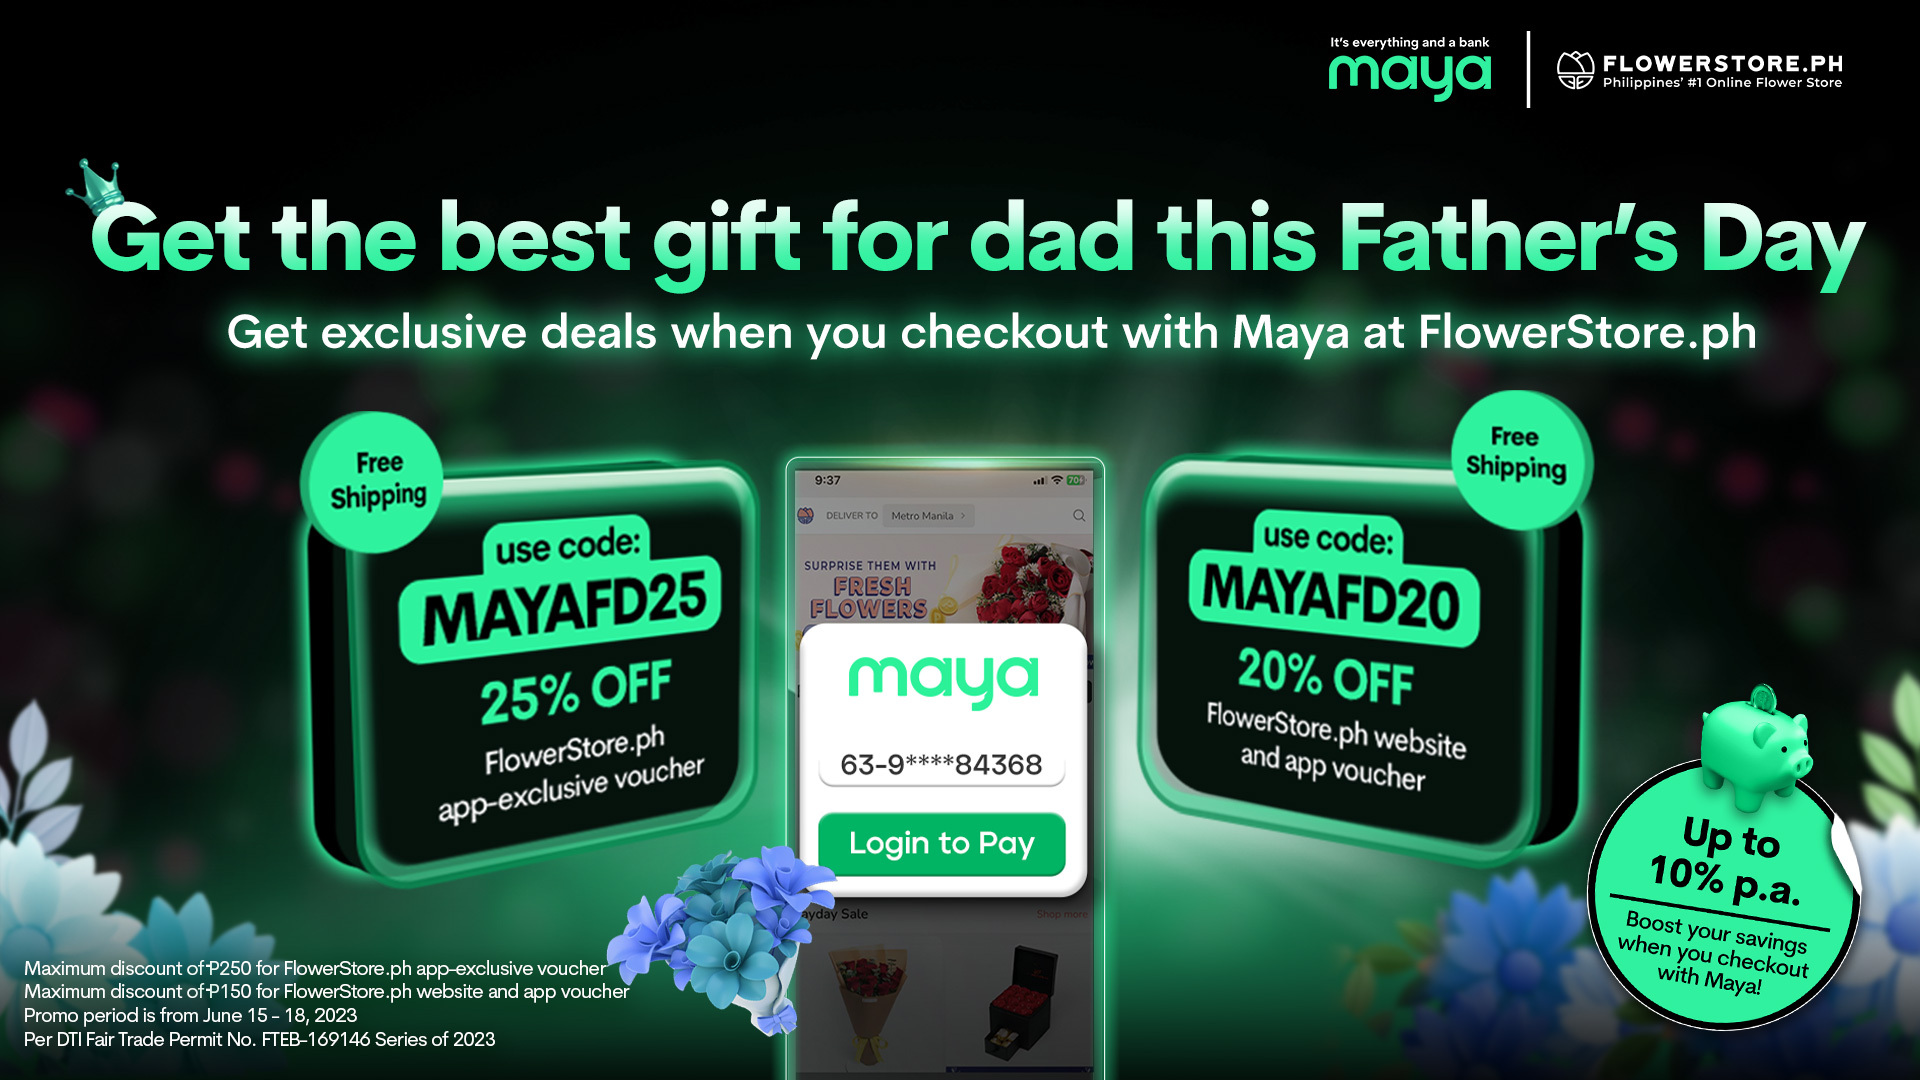 061323_Maya-EL-flowerstore-fathers-day_Deals-Page